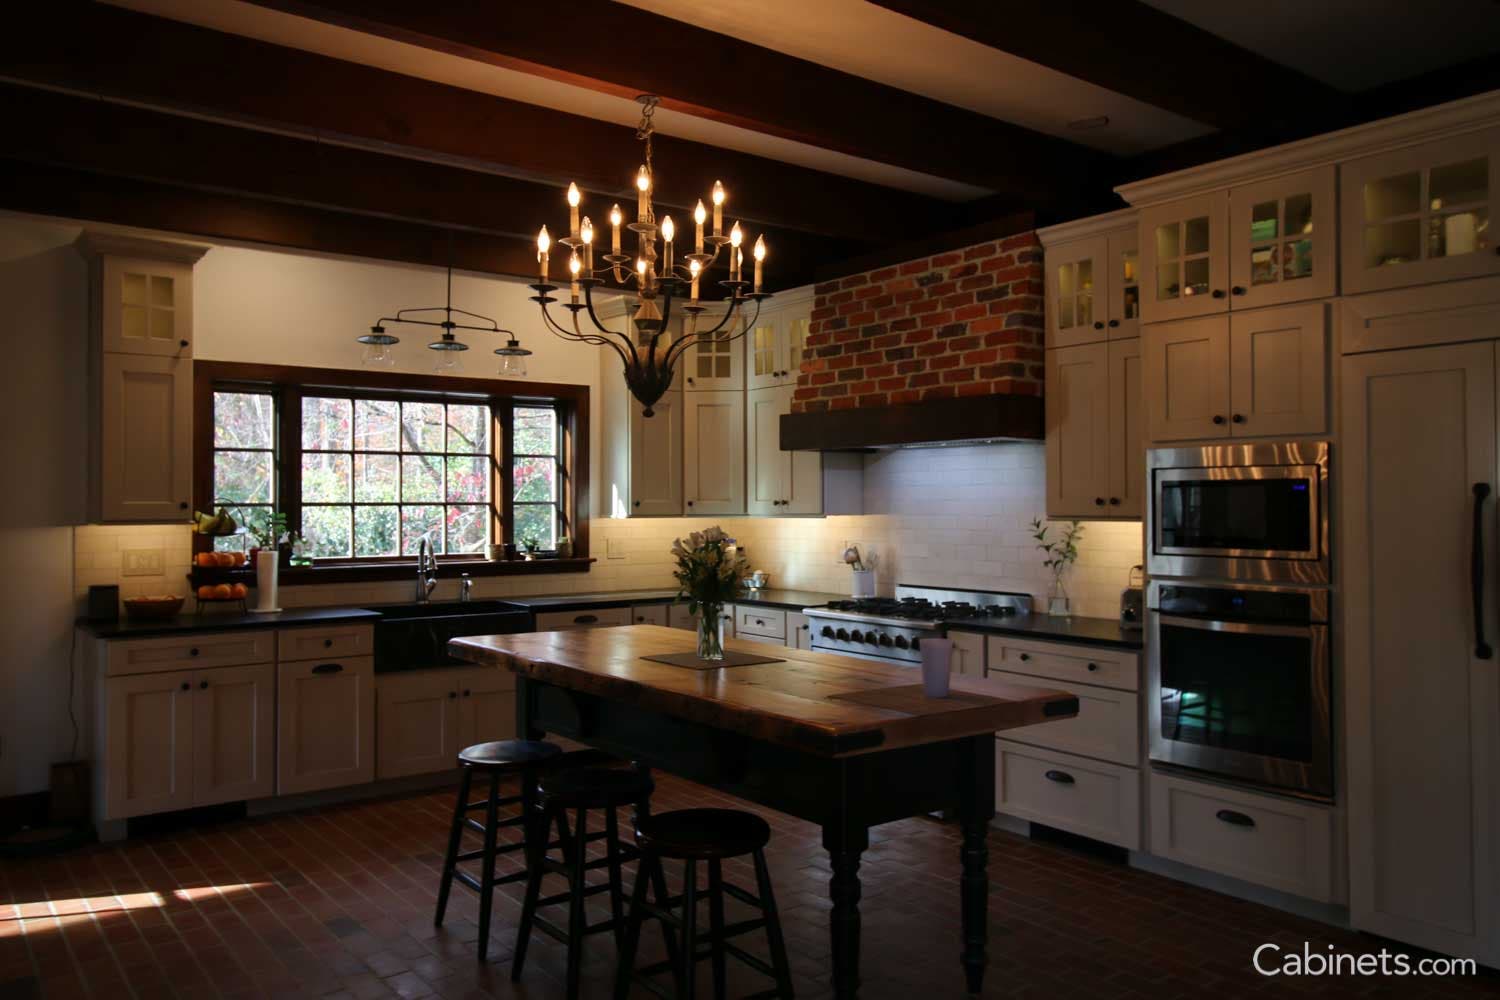 Brick Floors, Brick hood, Island with a wood countertop, Antique white cabinets